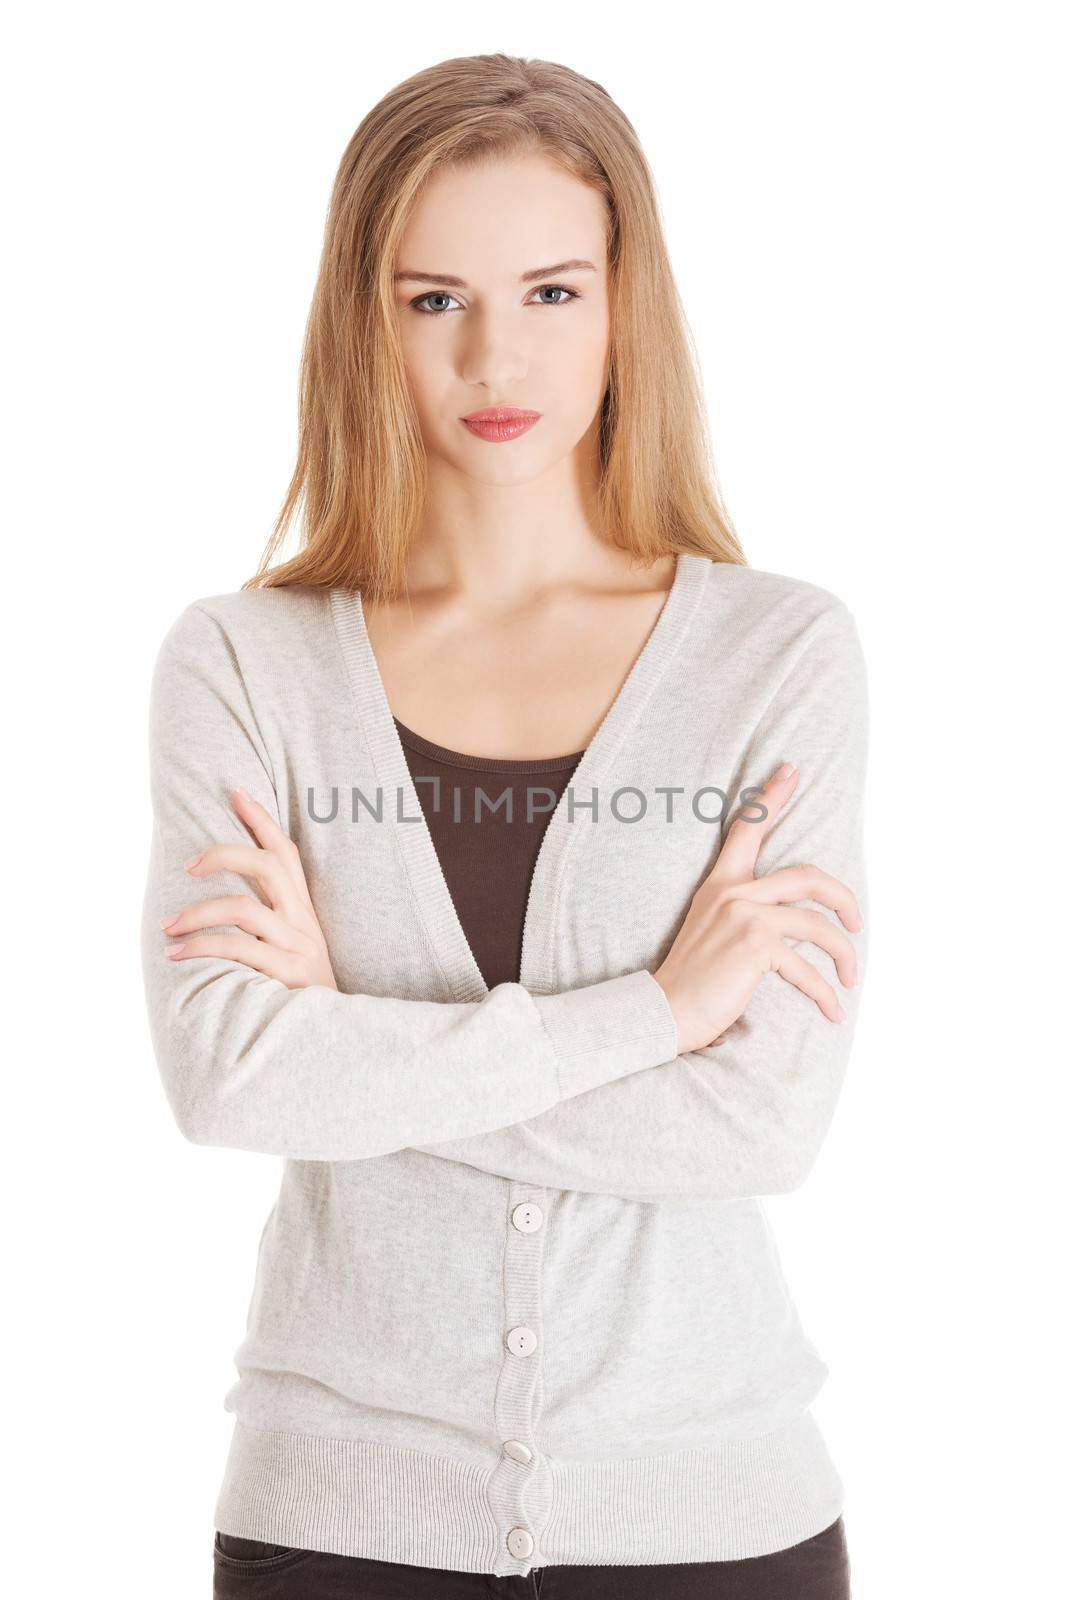 Portrait of beautiful casual serious woman. Isolated on white.